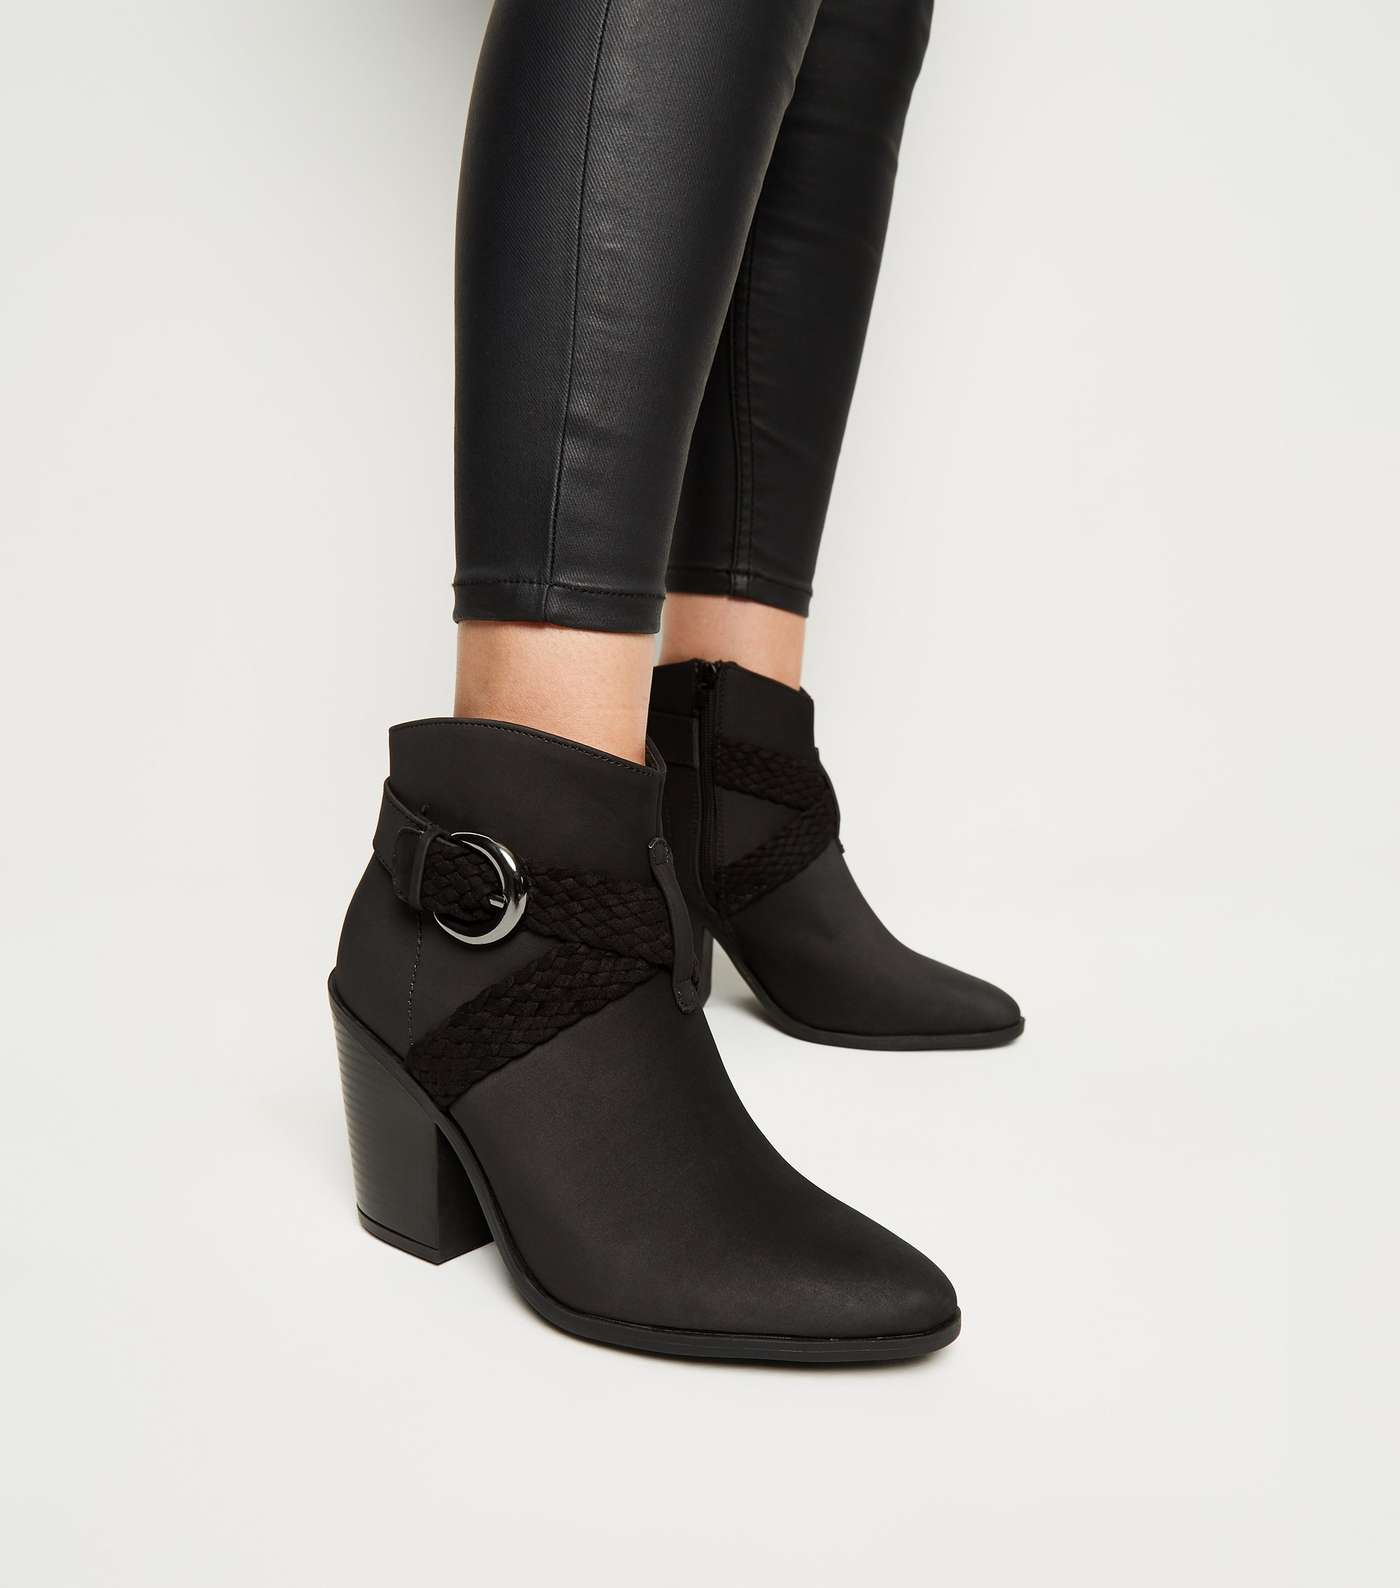 Black Woven Strap Heeled Western Boots Image 2